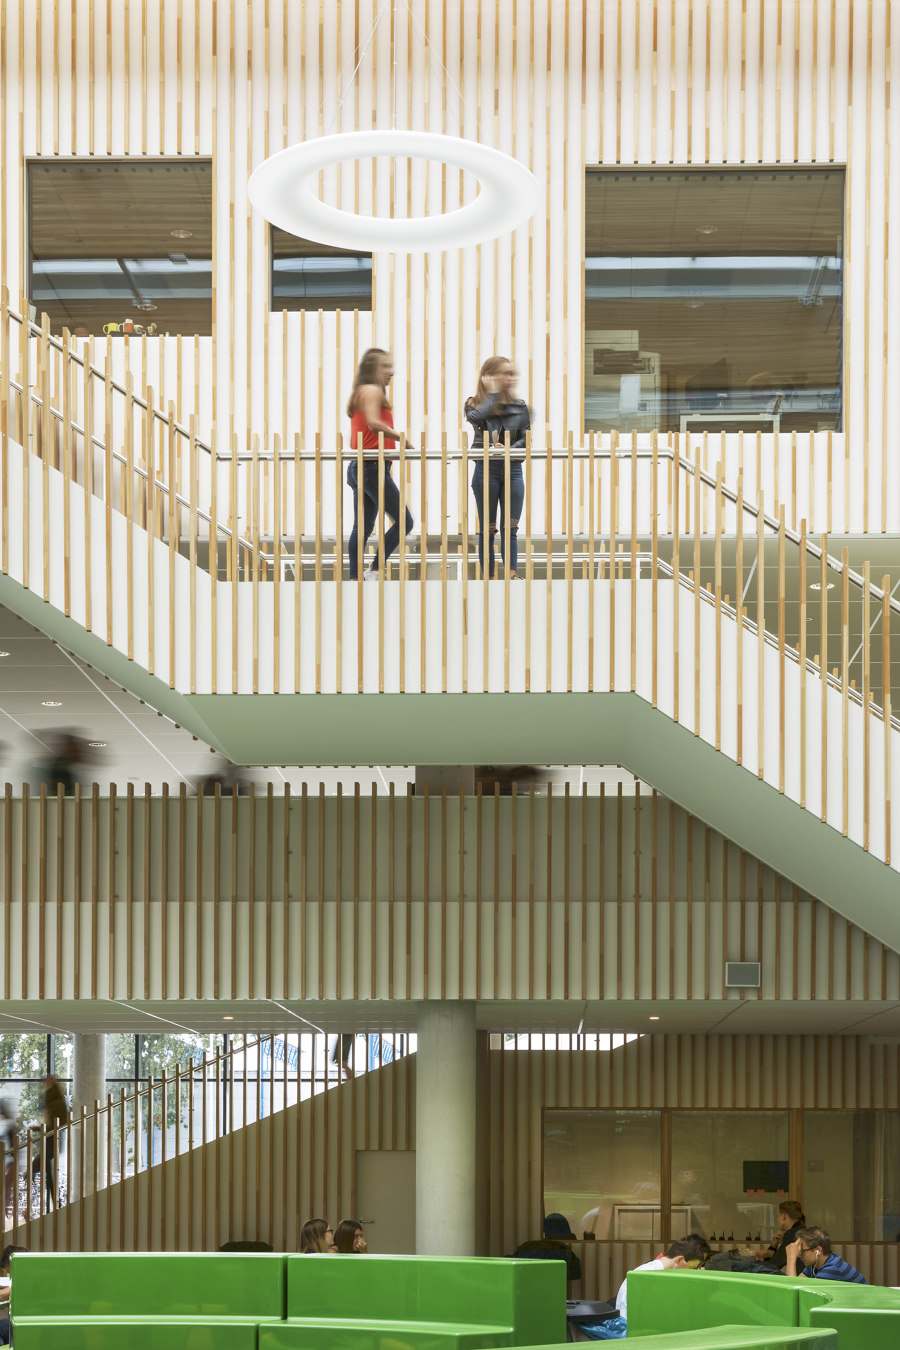 Frits Philips lyceum-mavo by LIAG architects | Schools